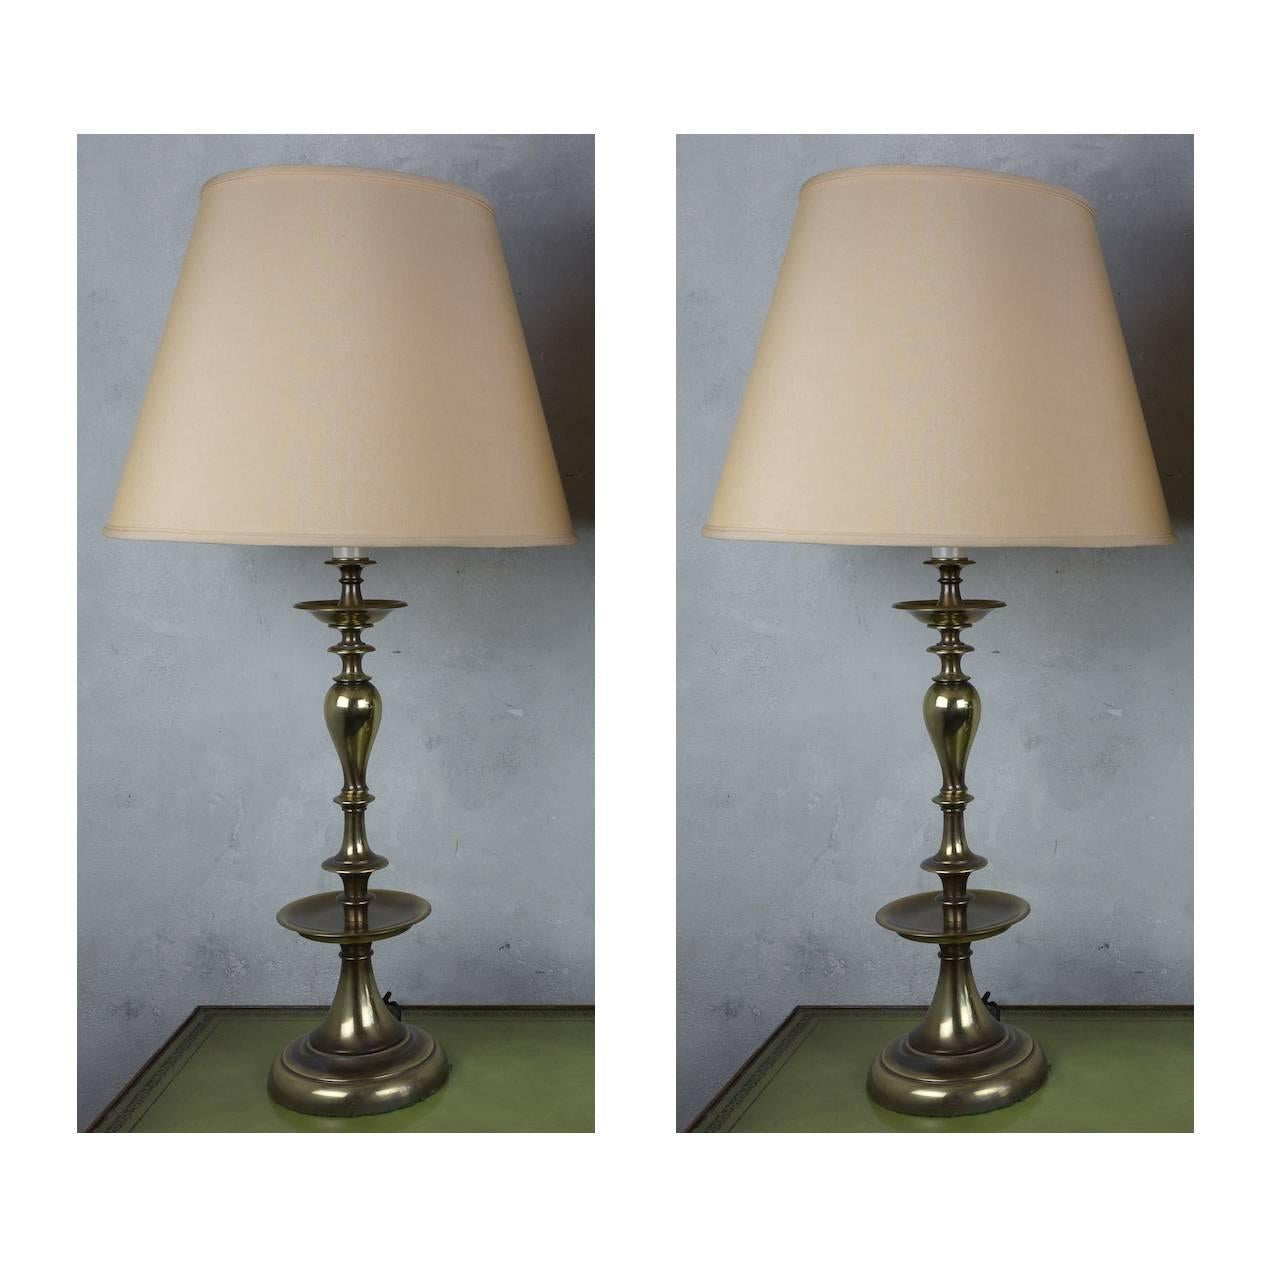 This pair of tall 1950s-1960s American mid-century brass lamps is finished in English brass. Recently rewired with double clusters and pull chains, these lamps are in very good vintage condition and their price includes hand polishing. The lamps